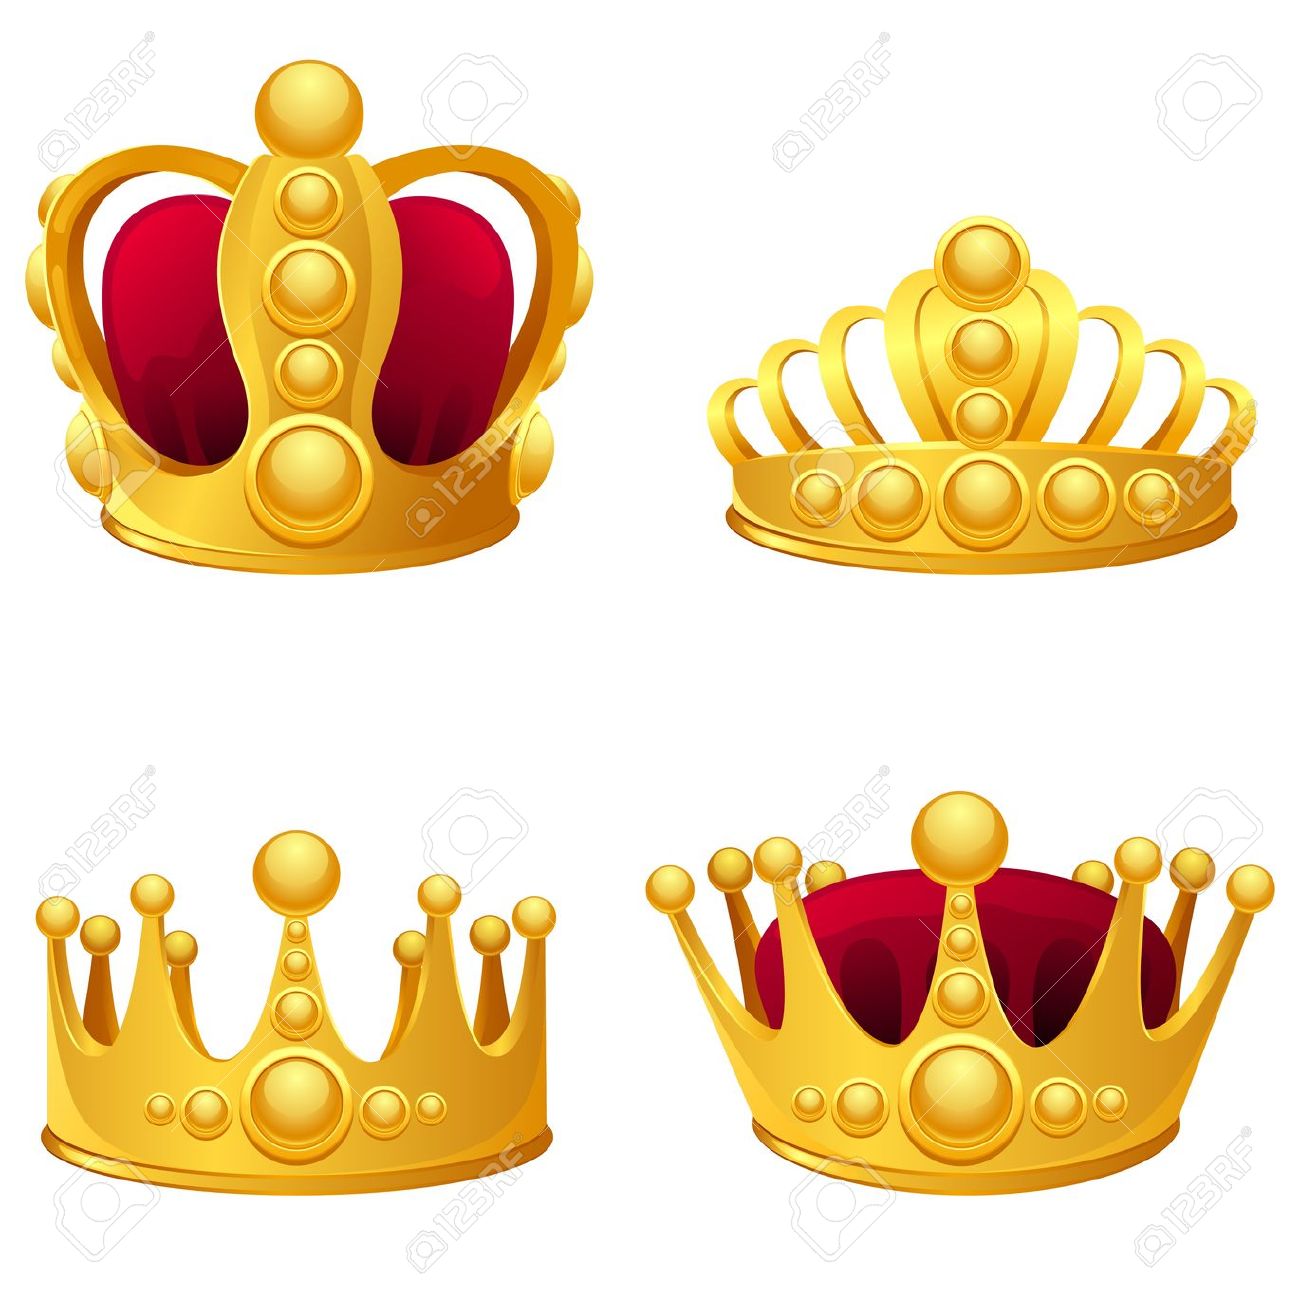 King And Queen Crowns Clip Art